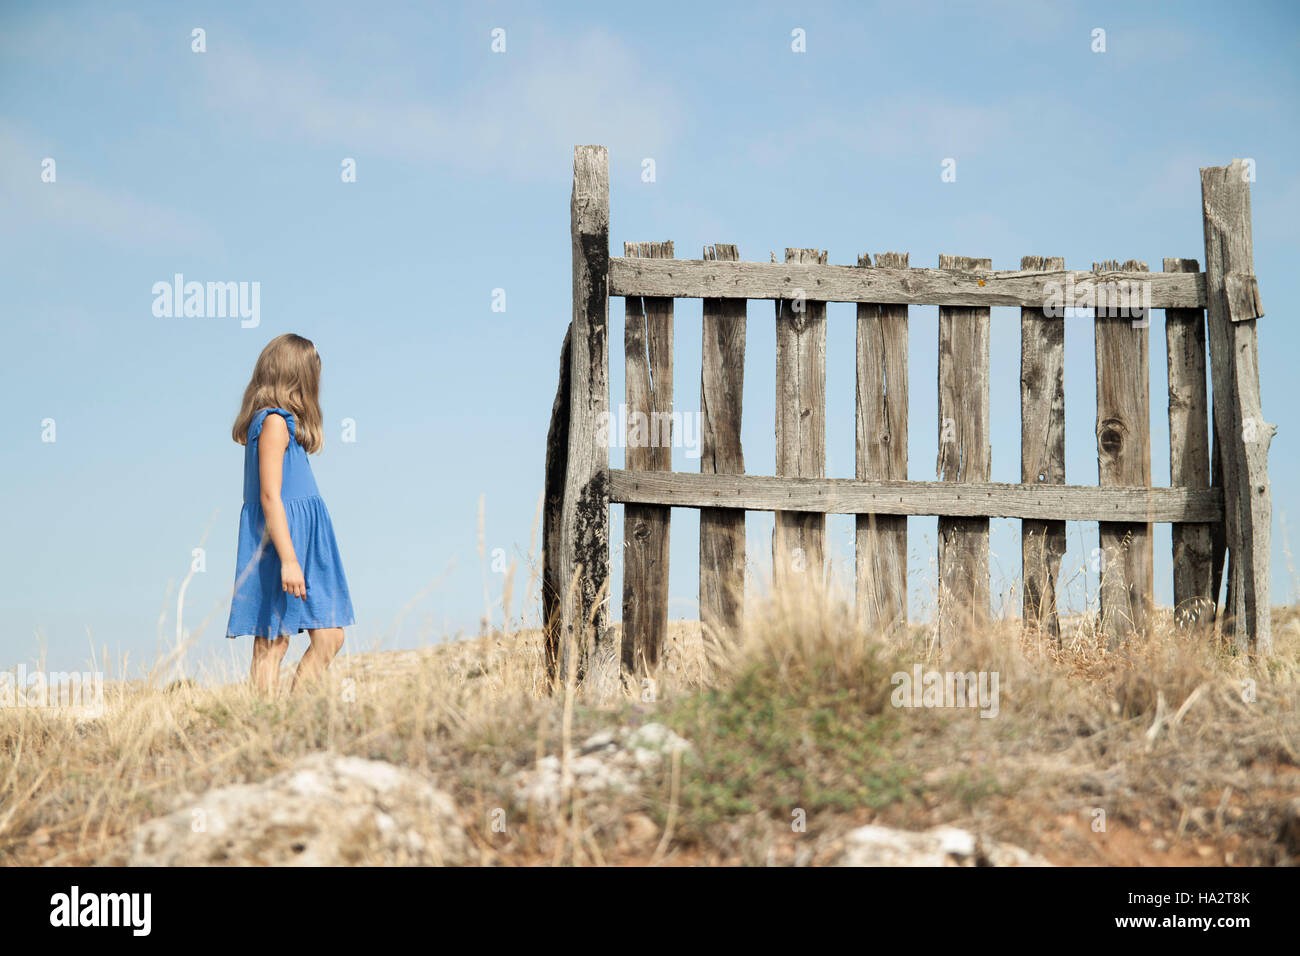 Girl walking past a fence Stock Photo